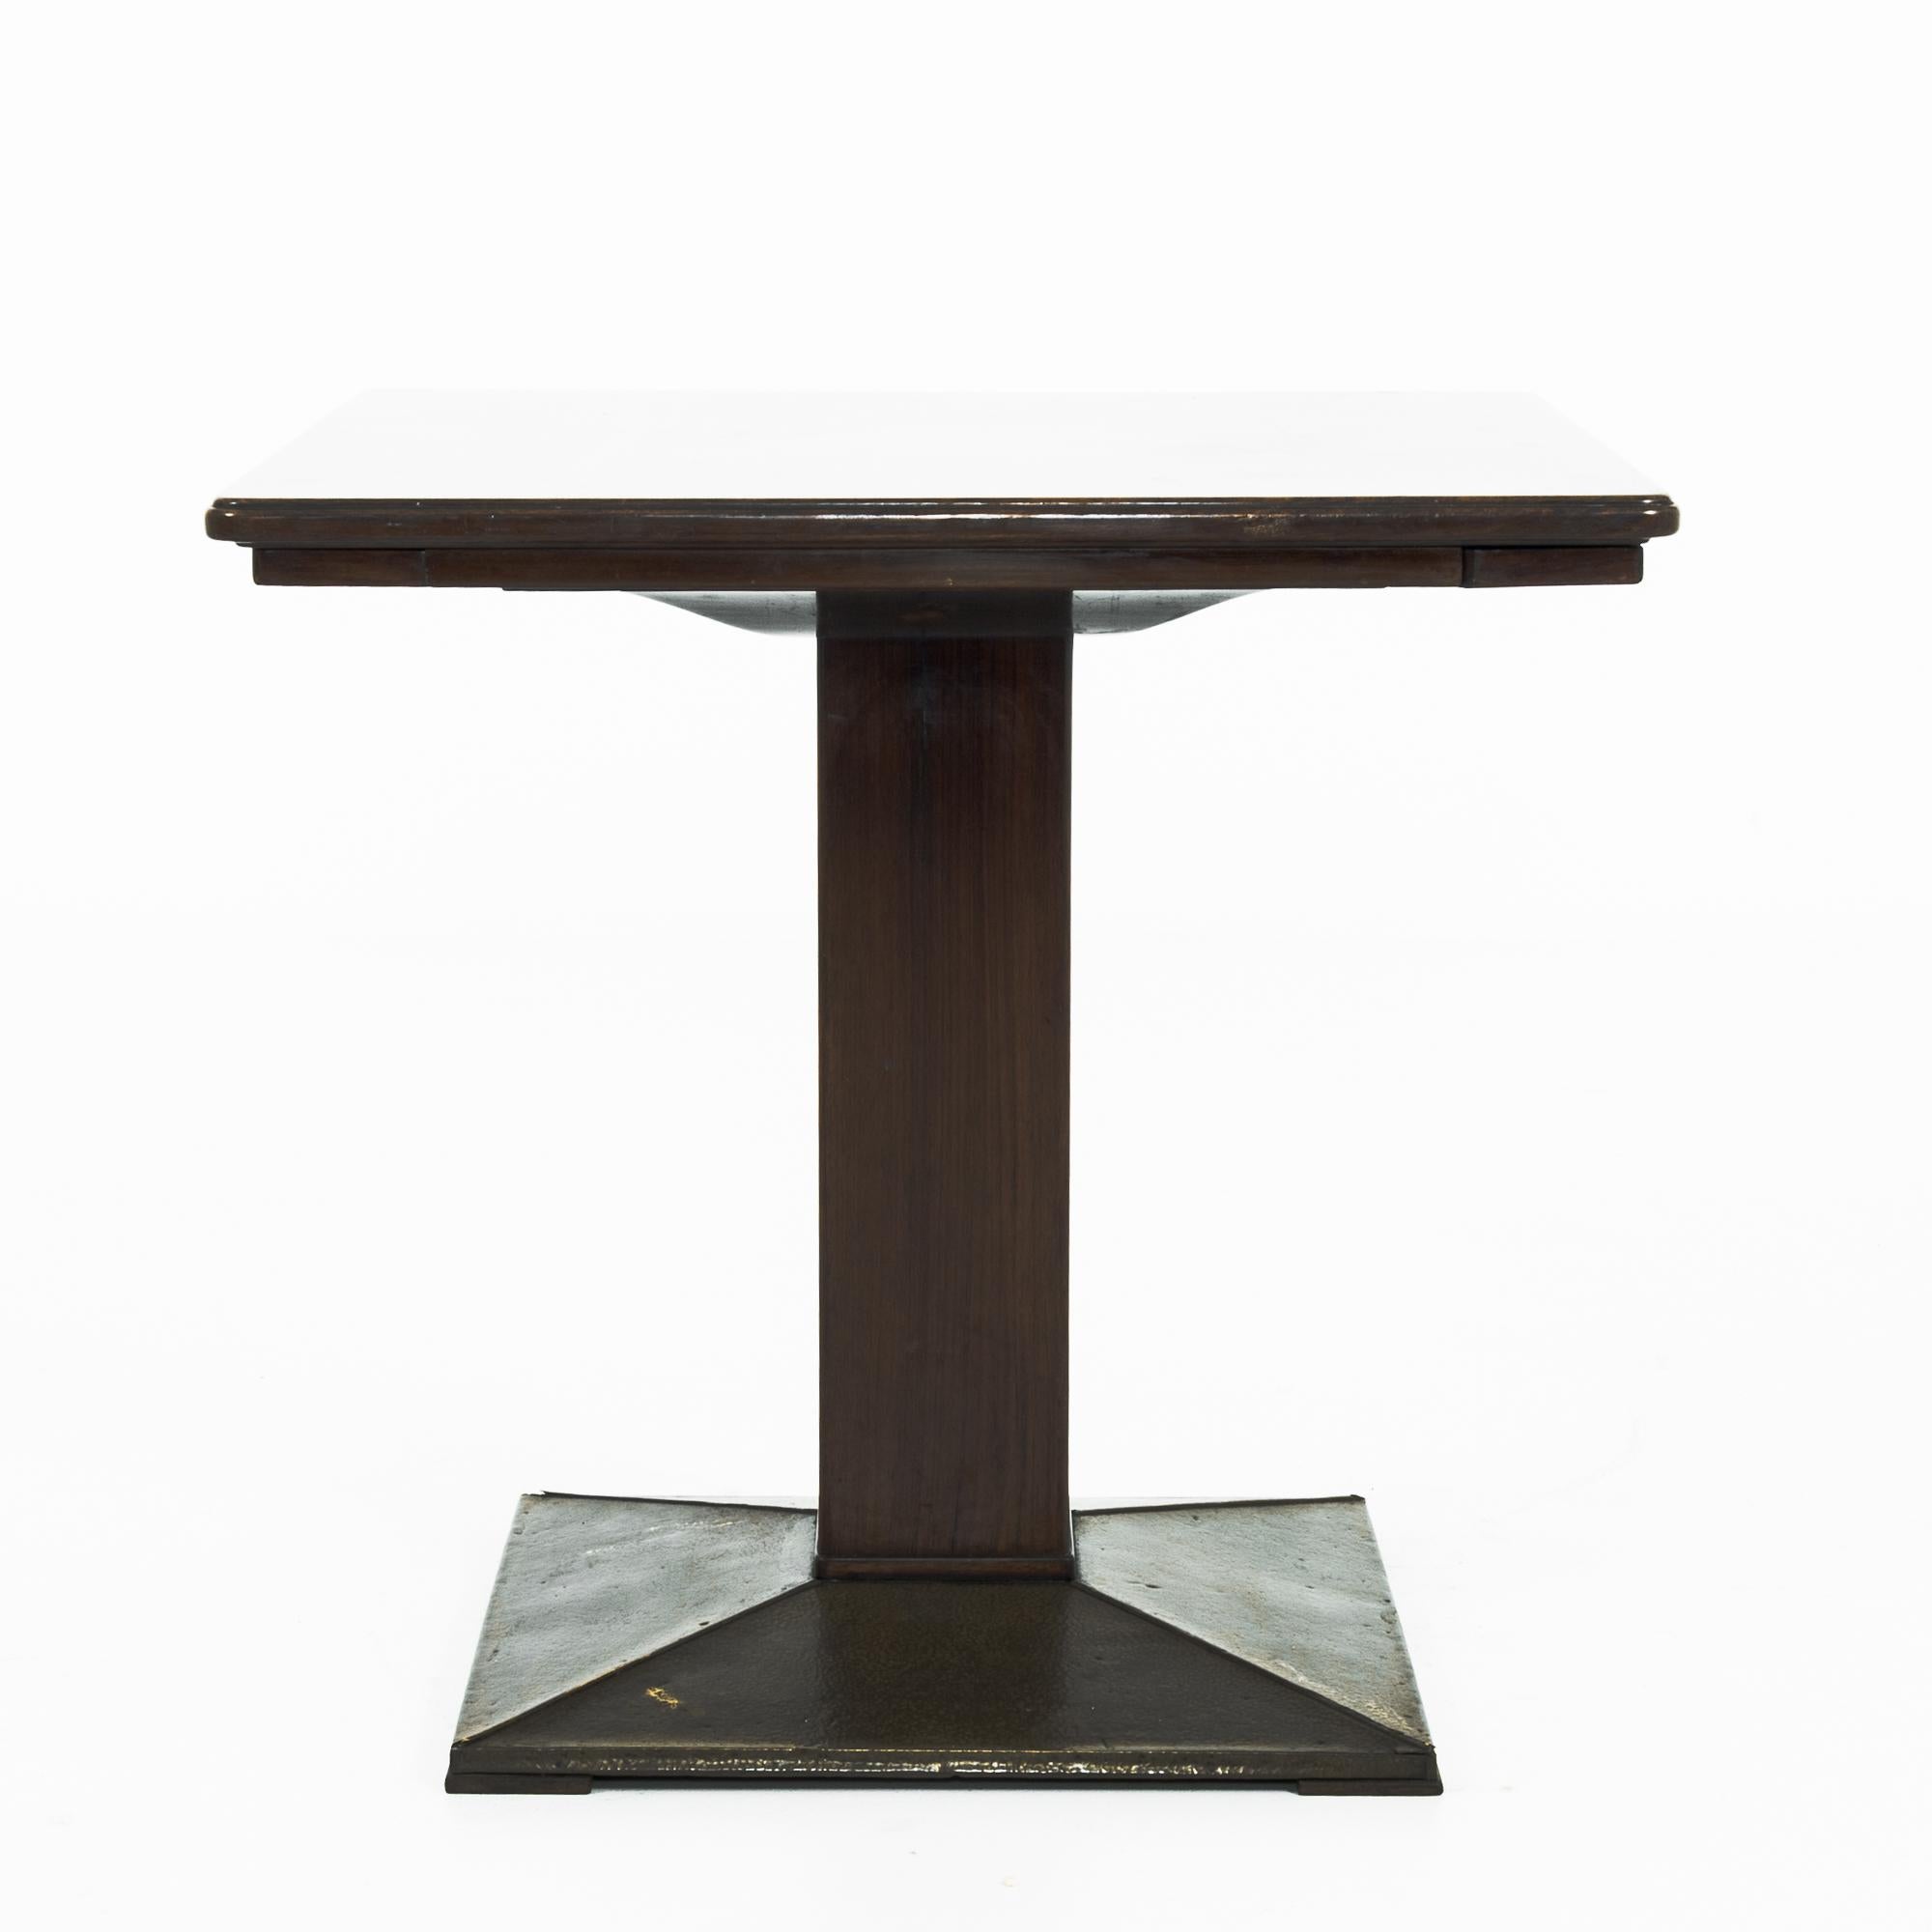 Sleek lines and sliding brass drink holders give this 1920s table a sense of Modernist luxury. Made in Czechia, a square pillar atop a metal base supports a tabletop of polished wood. Wooden drinks holders, inlaid with brass, fan out from underneath